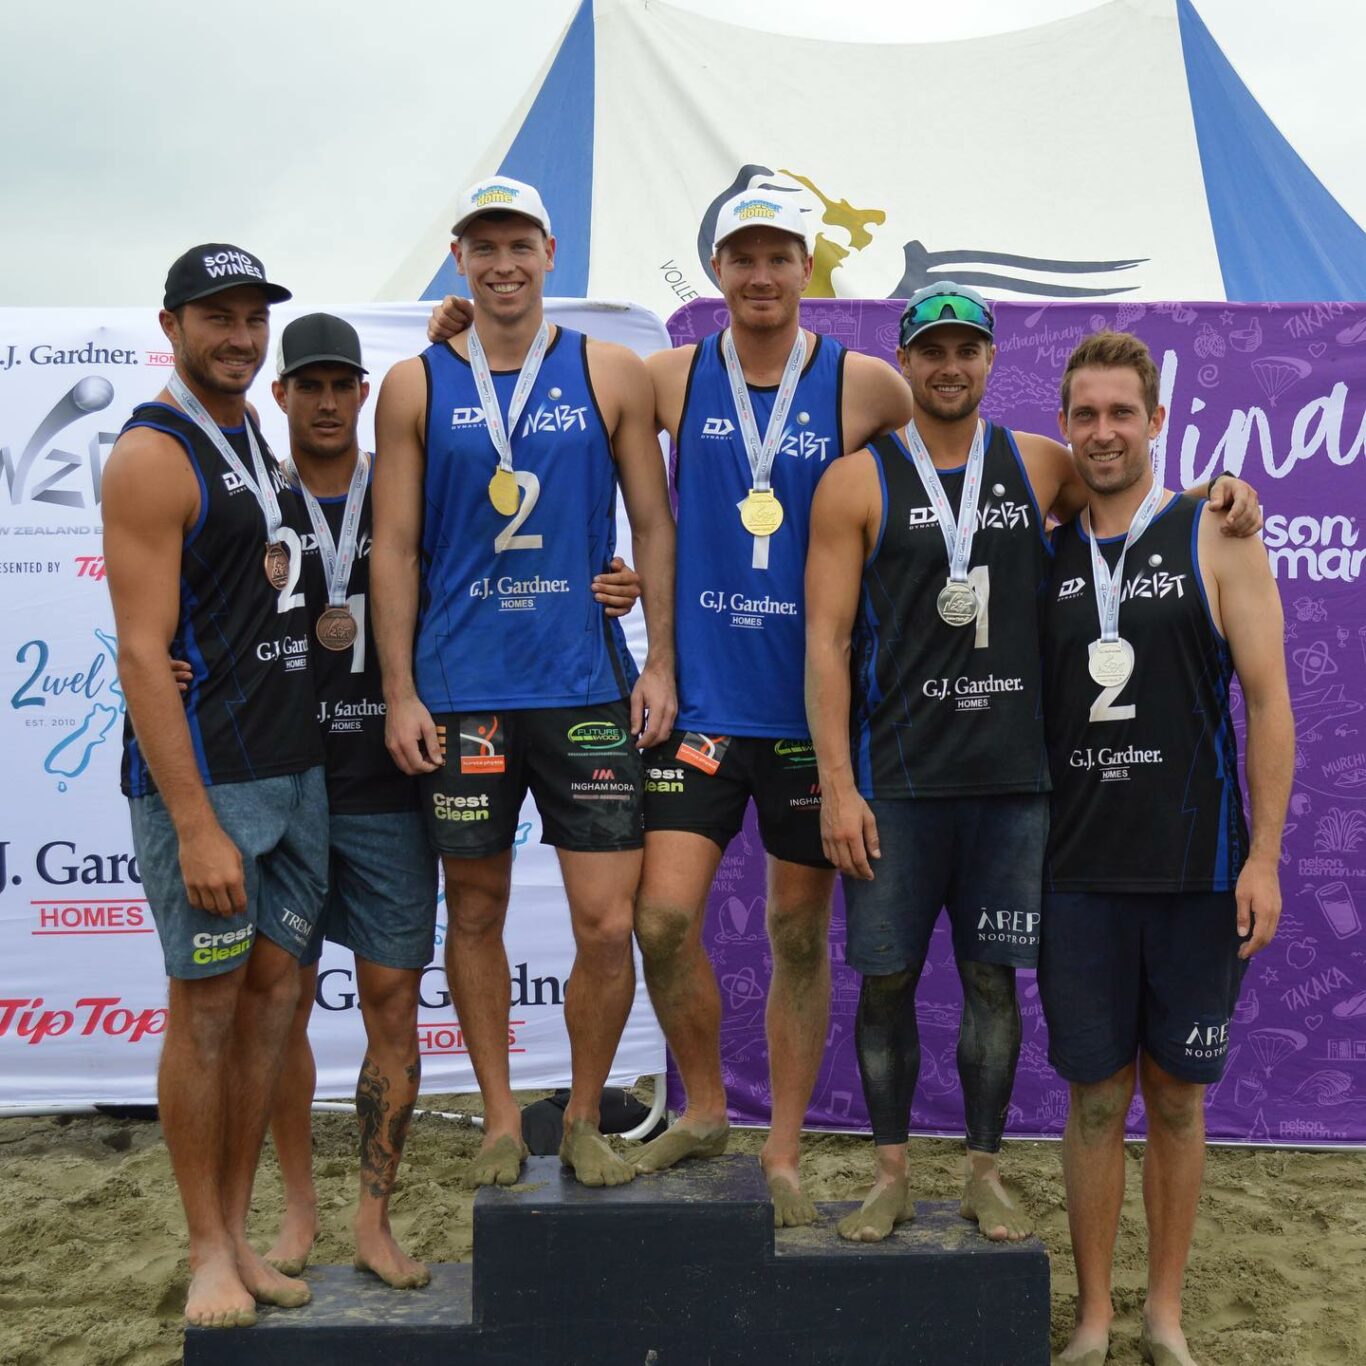 On the podium – J. Gardner Homes NZ Beach Volleyball Tour Nelson Gold Medal winners Sam Odea and Brad Fuller